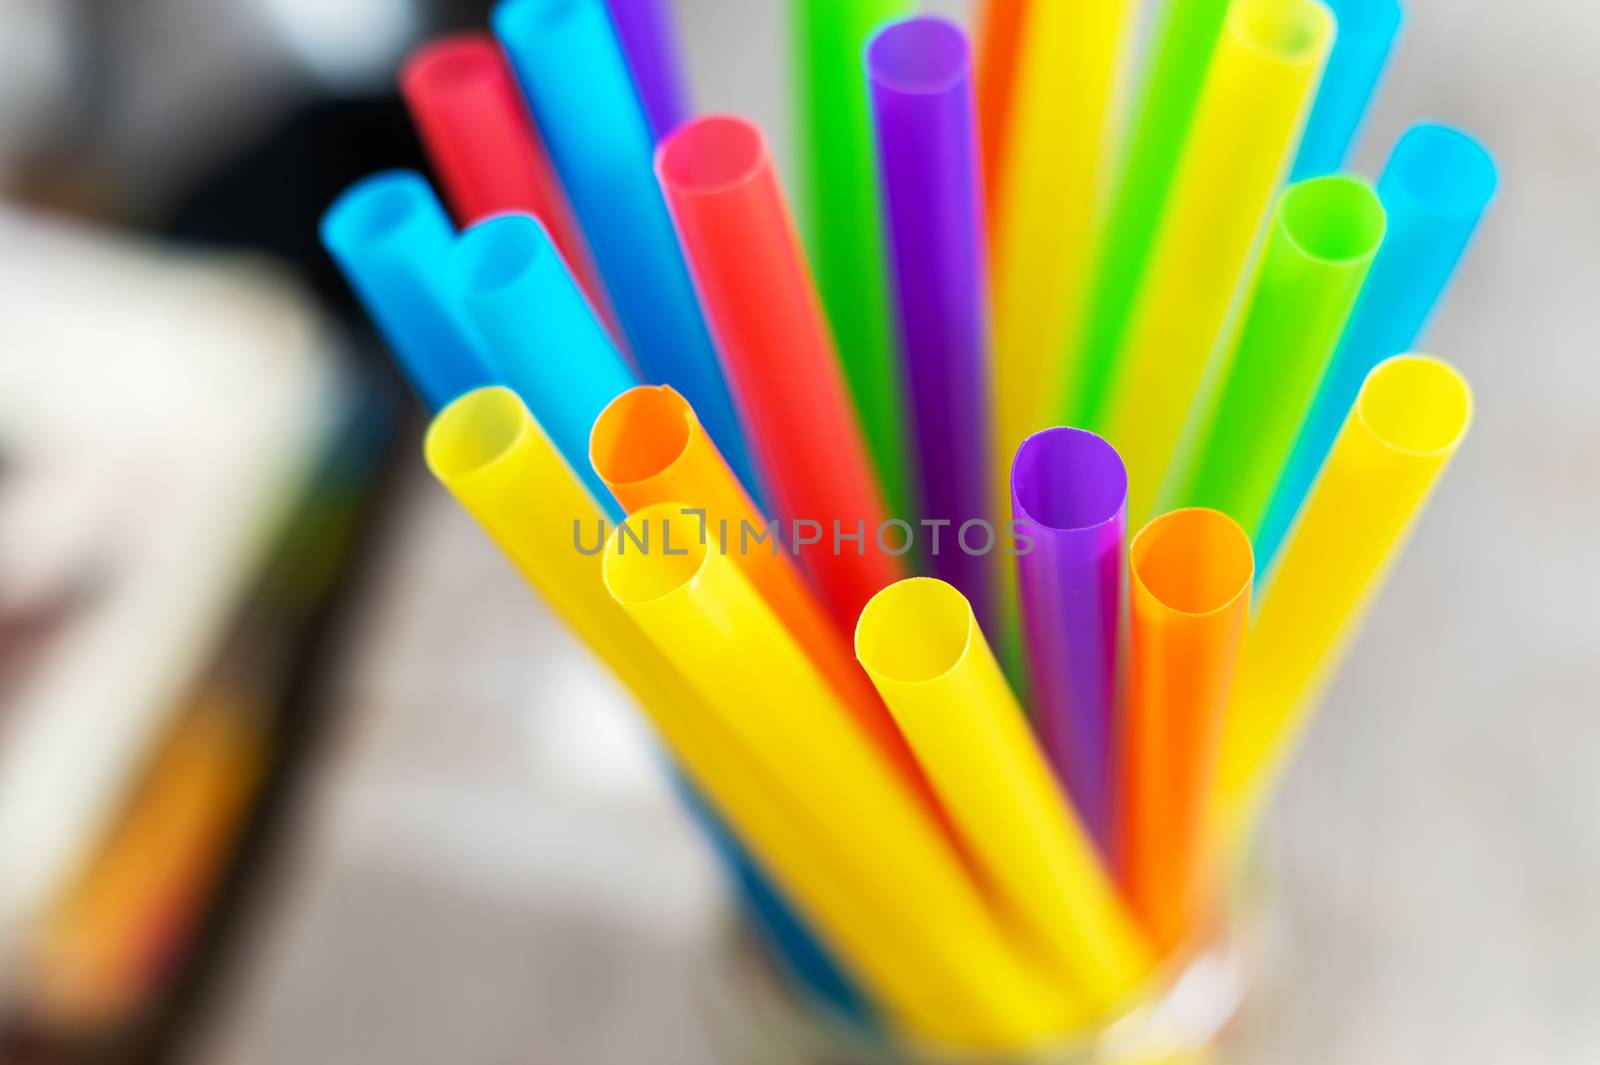 Plastic drinking straws and tubes by mbruxelle